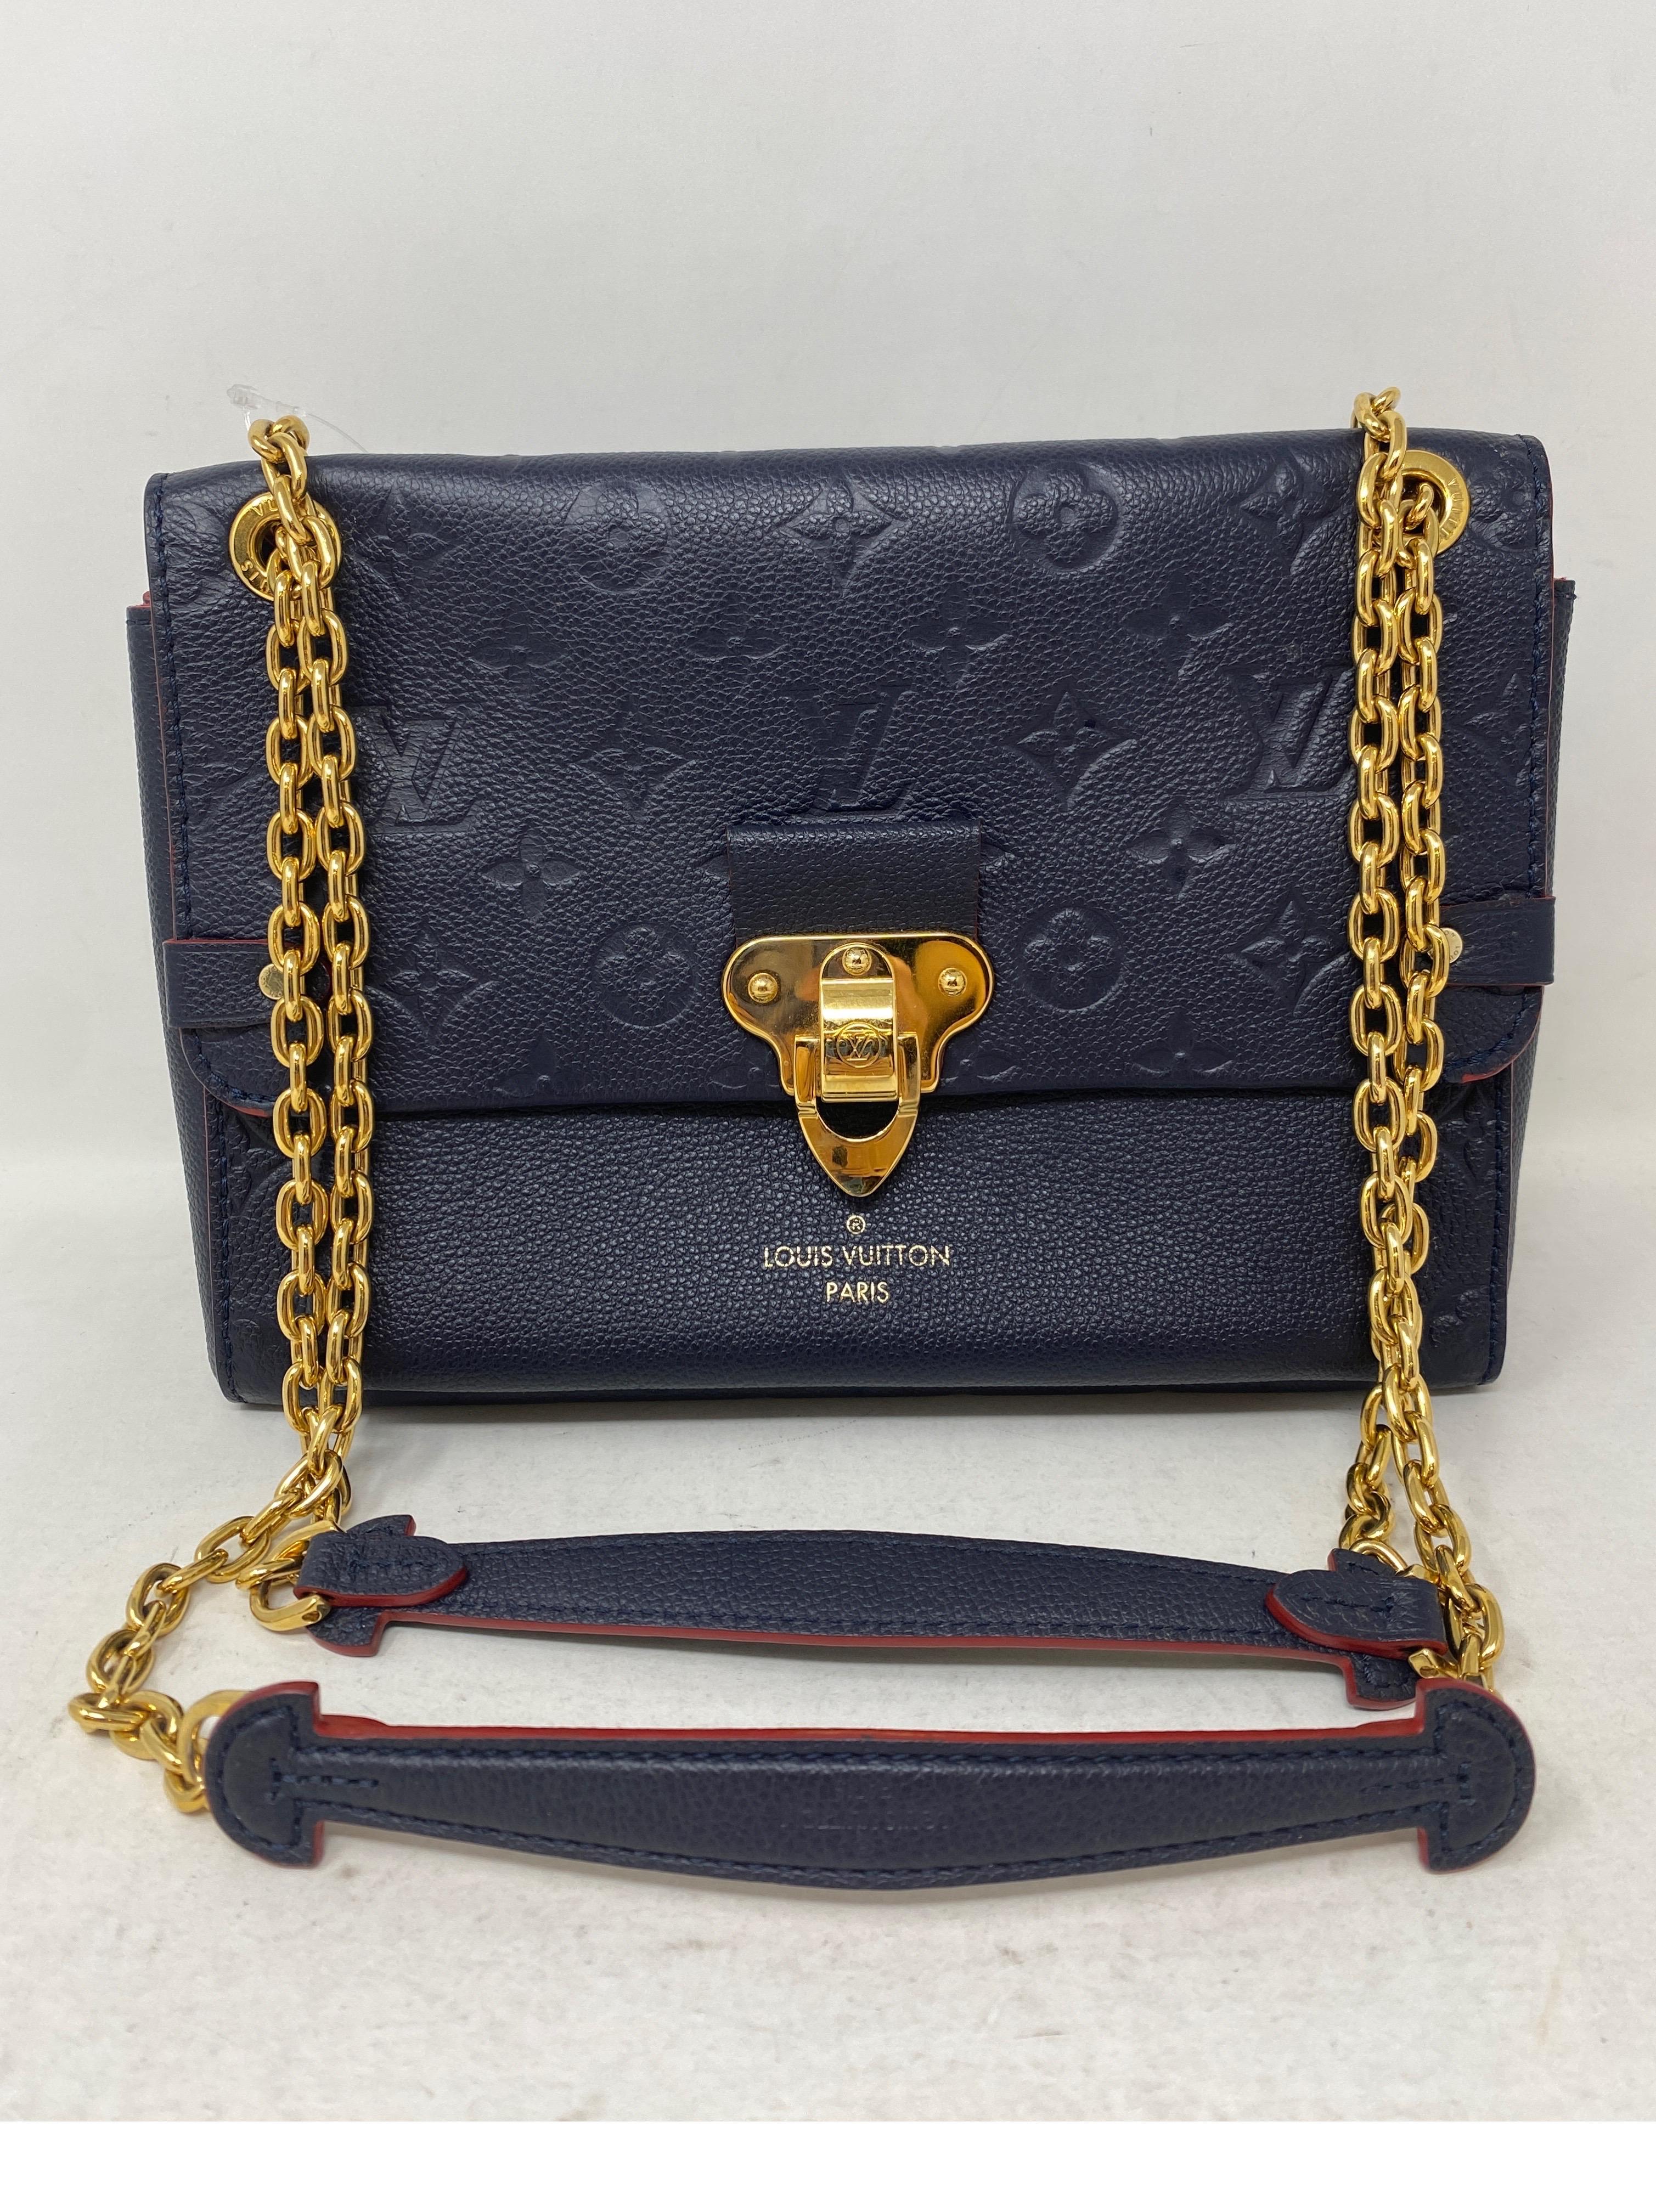 Louis Vuitton Navy Eimpreinte Leather Crossbody Bag. Good condition. Gold hardware. Great crossbody bag or can be doubled as a handbag. Nice clean red interior. Guaranteed authentic. 